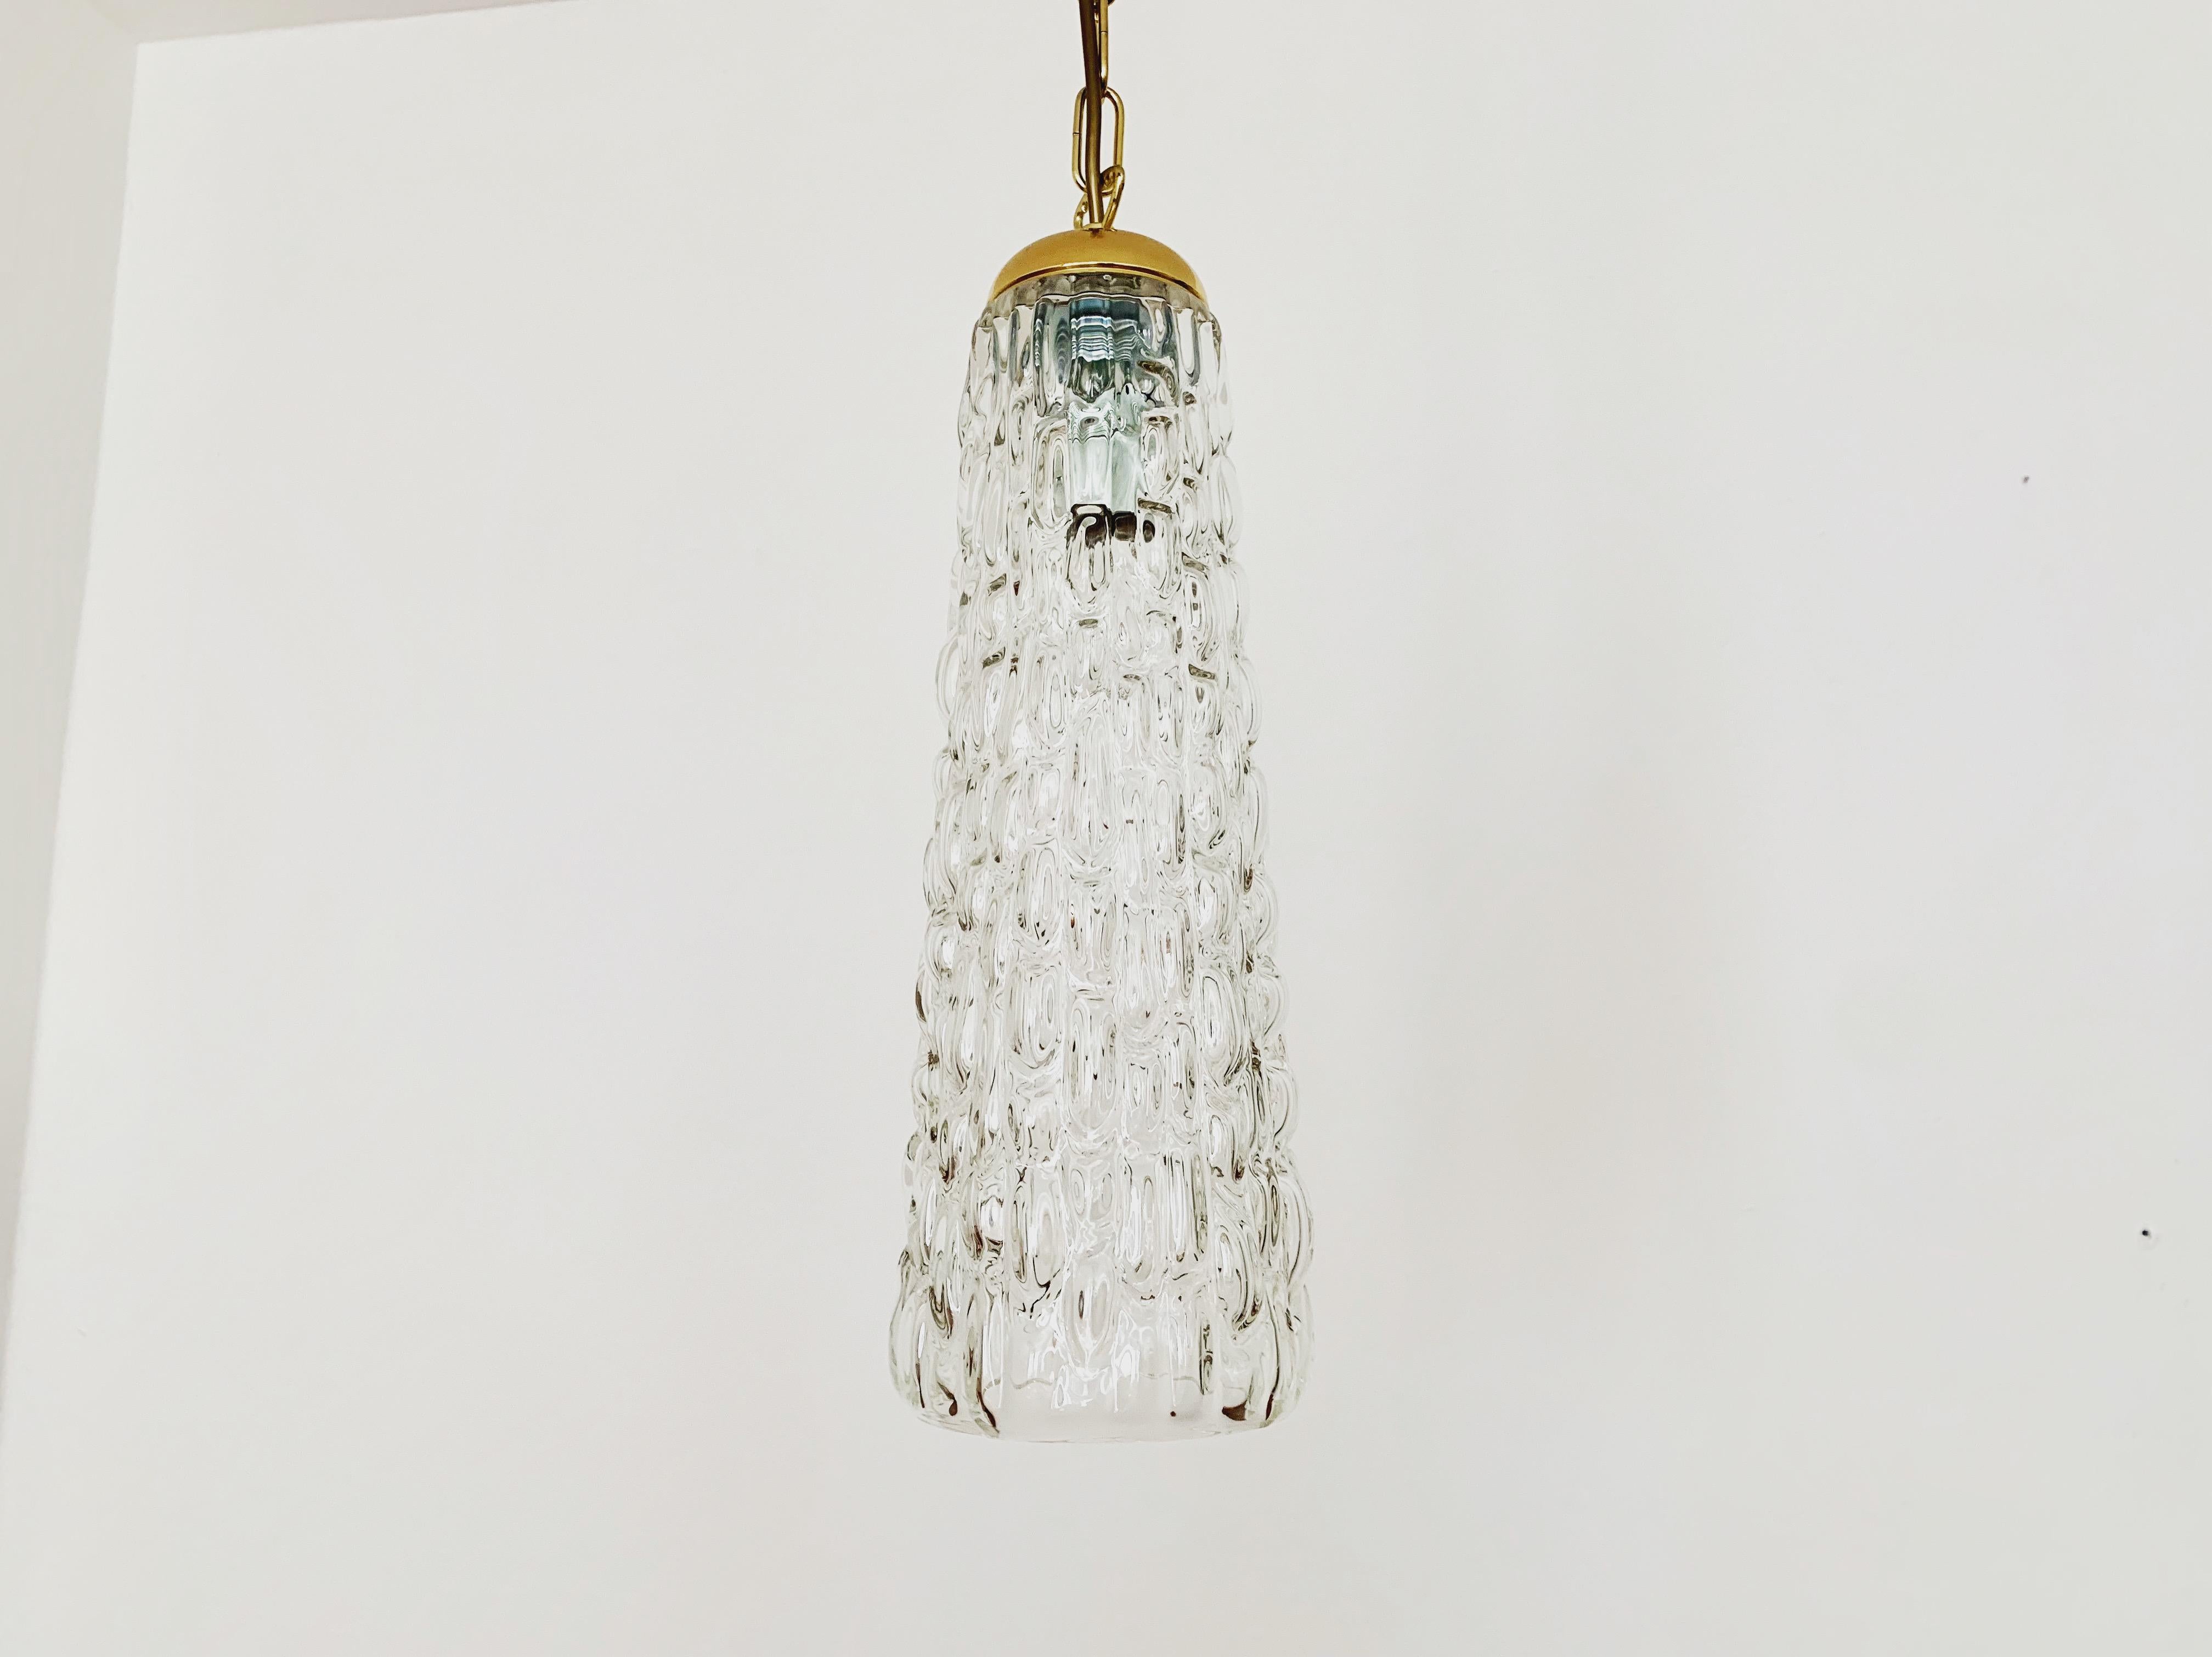 Austrian Set of 4 Large Crystal Glass Pendant Lamps For Sale